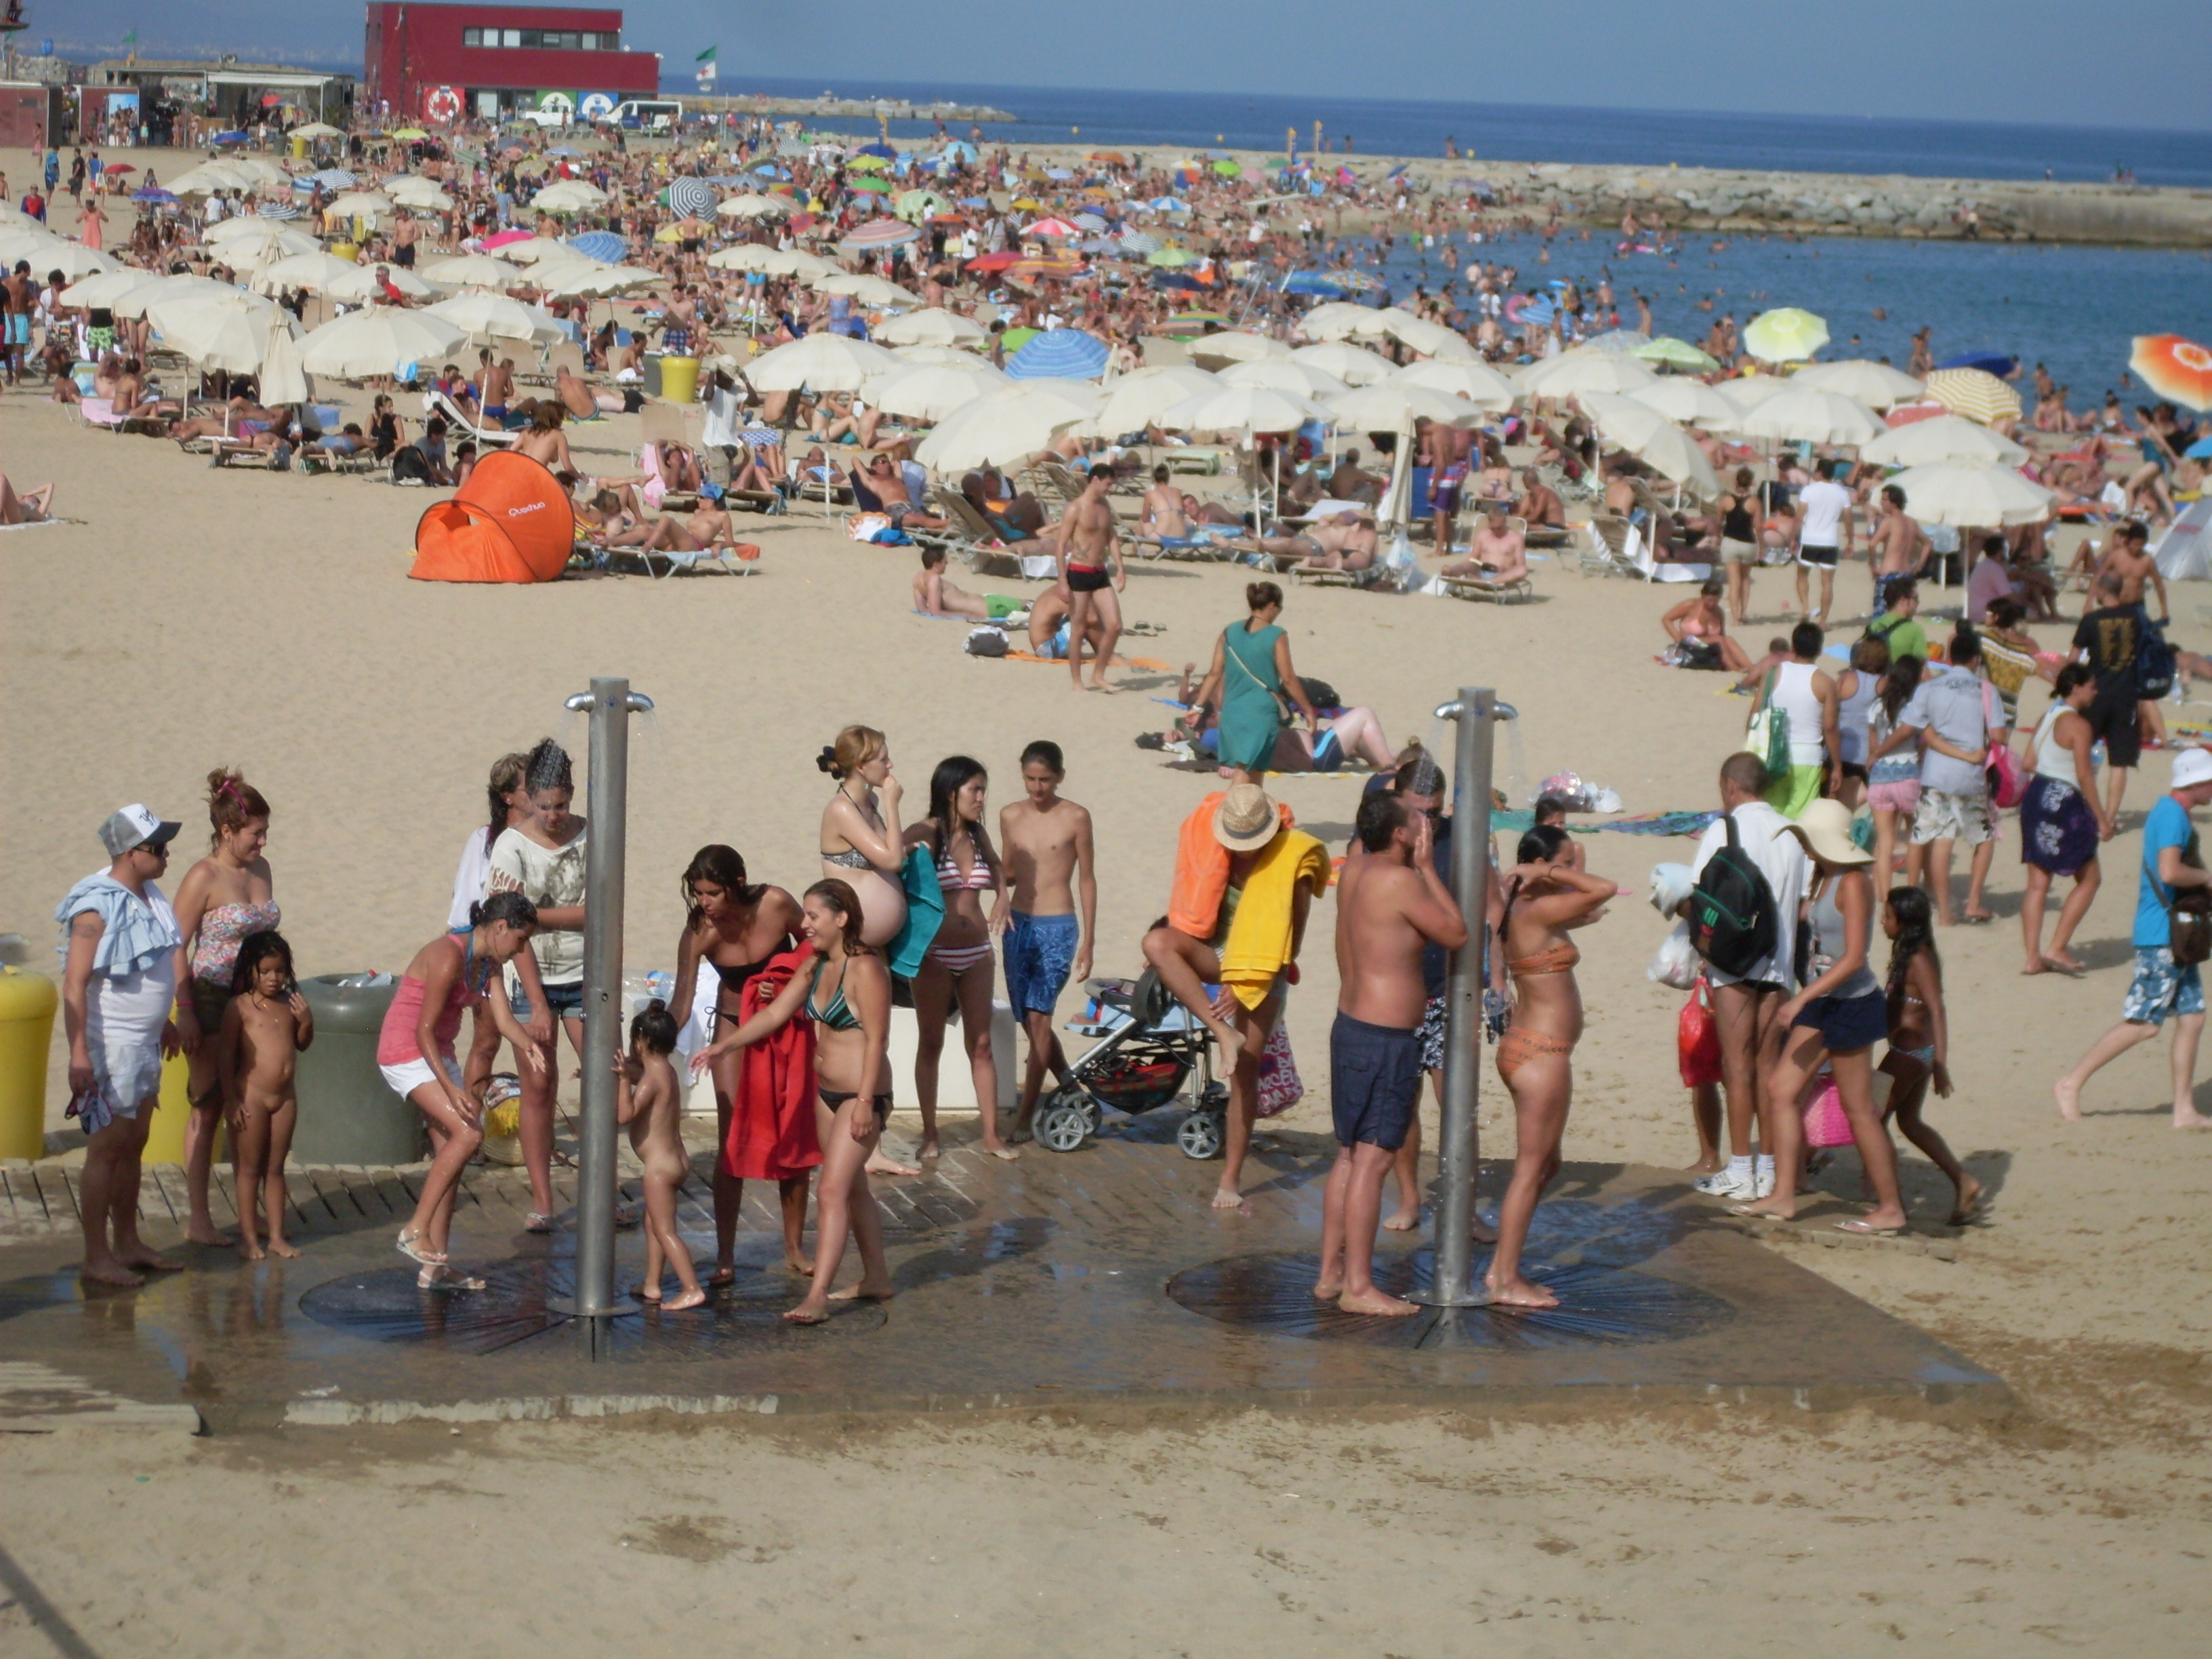 Naked Beach People - A Day at the Beach in Barcelona â€“ The Sarcastic Cynicâ„¢